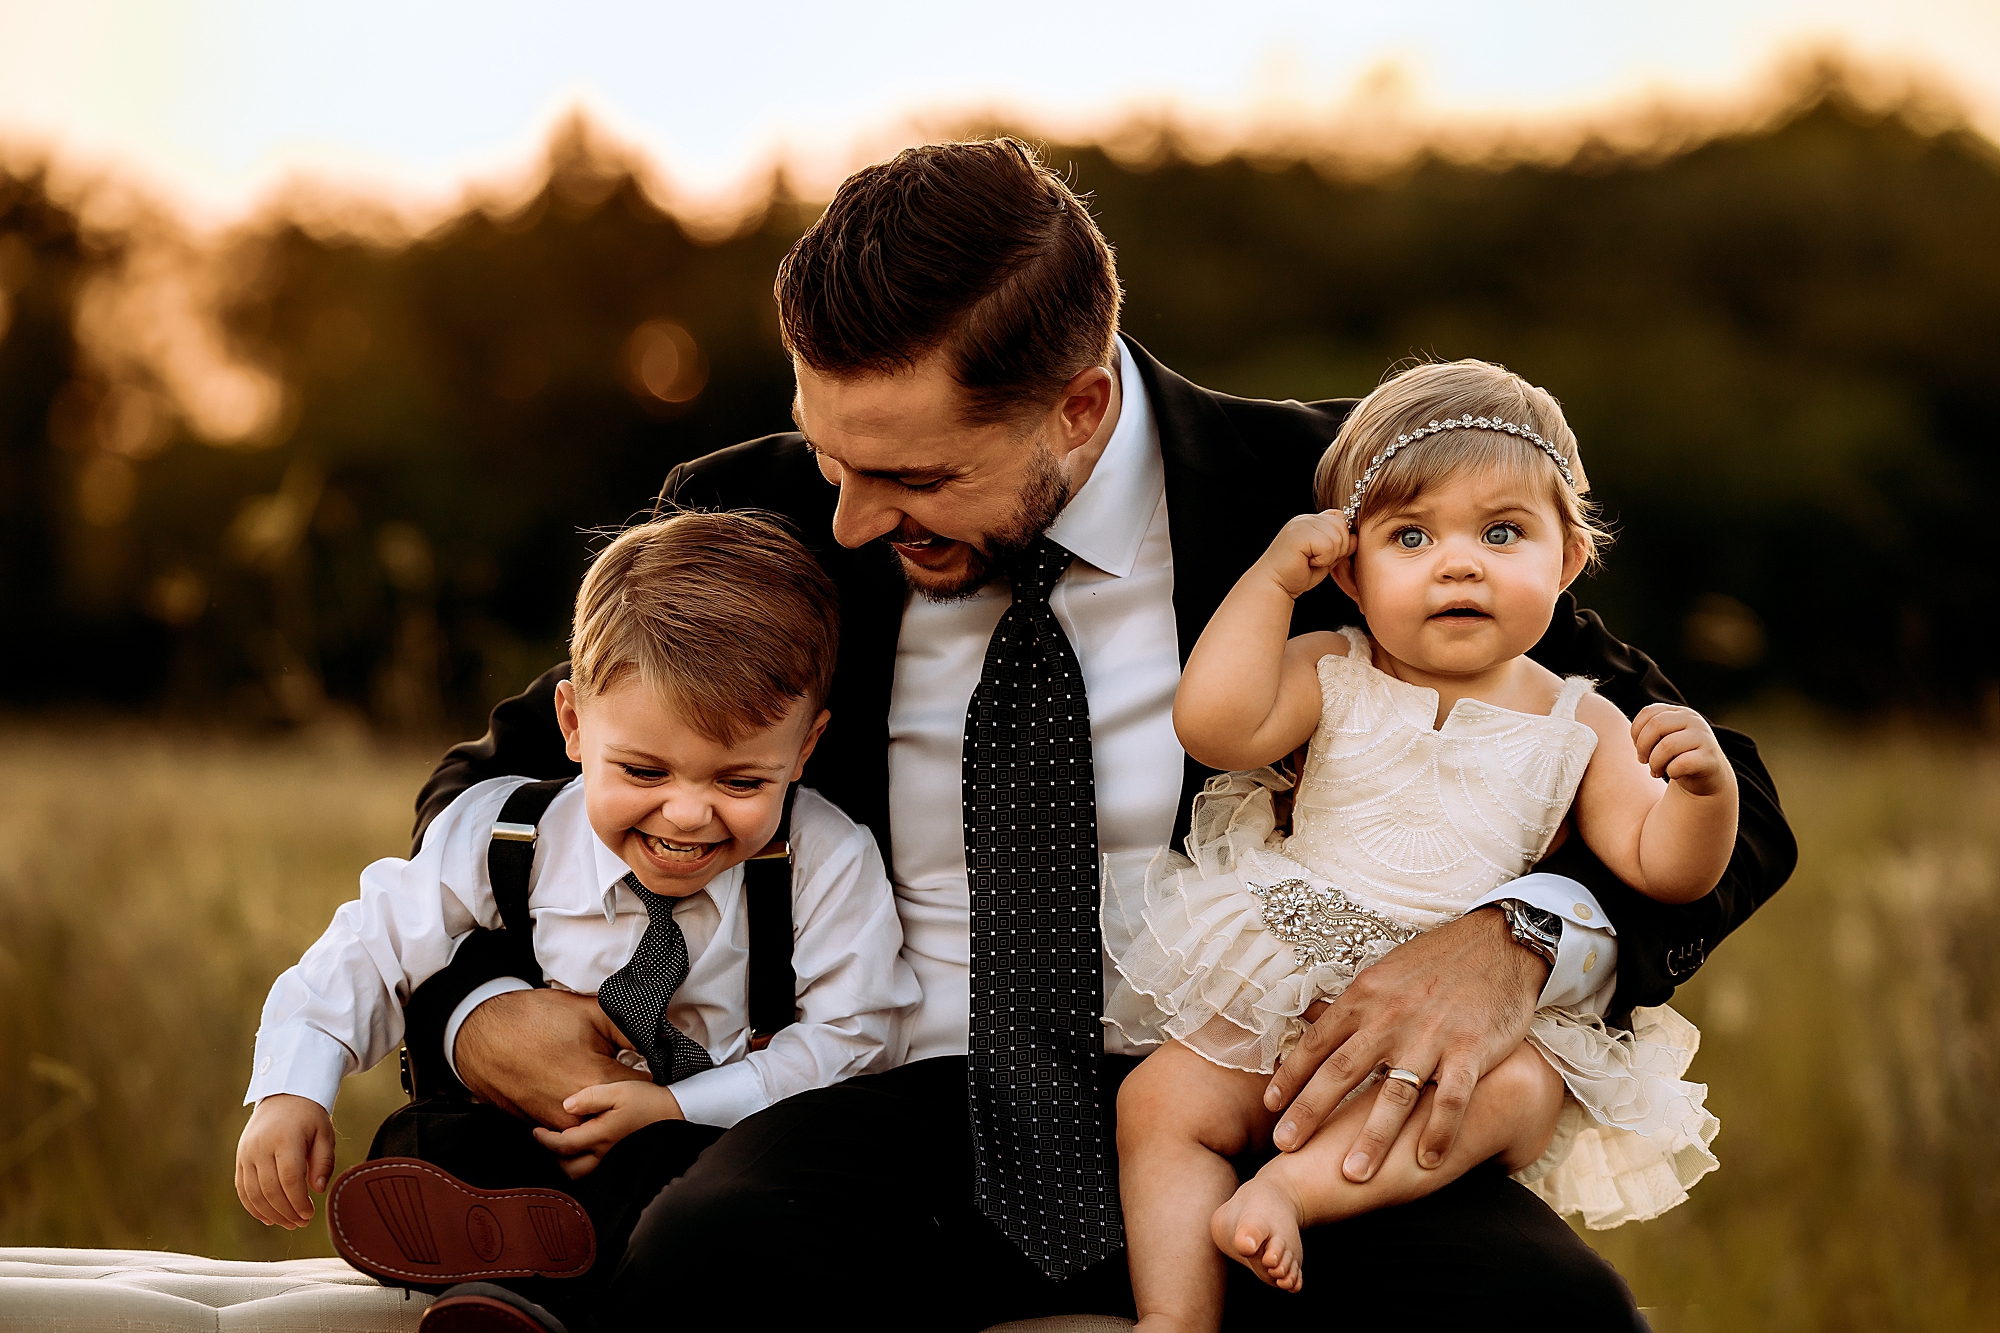 7 Tips To Bring Out The Best Poses For Your Family Photo Shoot | Mount  Studio Blog